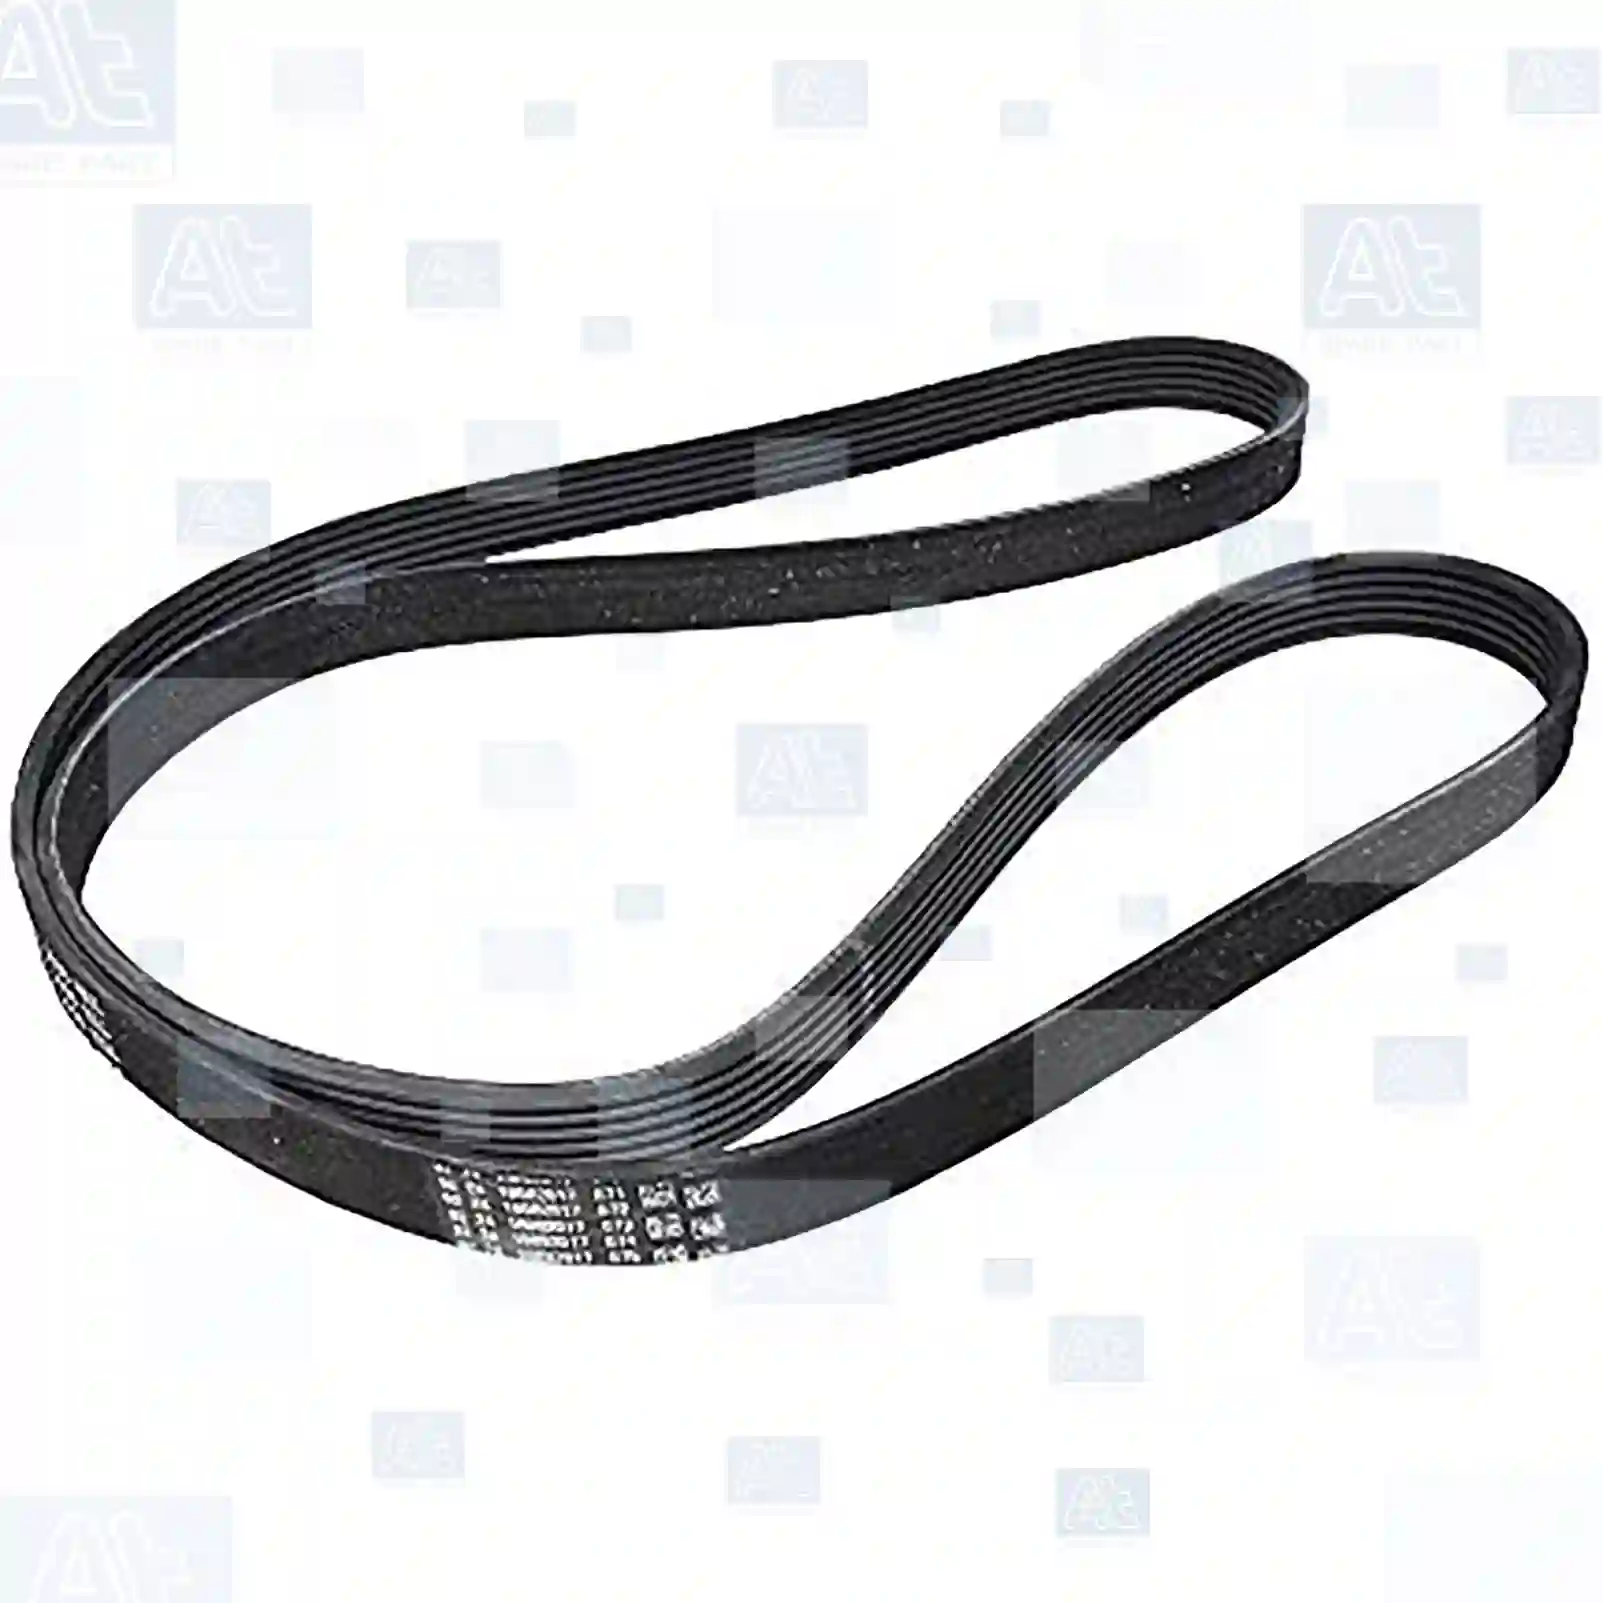 Multiribbed belt, at no 77707966, oem no: 074260849AB, 078903137K, 078903137P, 5103565AA, 5127258AA, 5103565AA, 90448002, 90490781, 90500354, 90501385, 90501385, 25212-3C120, XW4E8620AD, 4638133, 53013298AB, 68045801AA, 90916-02462, 90916-02583, 90916-02584, LF4J15909C, LFA1159099F, LFH115909B, 0019938696, 0129974892, 0149970692, 0149970792, 0149971792, 6119972292, 6119973092, 1340615, 1854714, 1854723, 99610215193, 4623948, LFH11-5909B, 90916-02462, 90916-02583, 90916-02584, 074260843, 074260849L, 5X0260849A, ZG01585-0008 At Spare Part | Engine, Accelerator Pedal, Camshaft, Connecting Rod, Crankcase, Crankshaft, Cylinder Head, Engine Suspension Mountings, Exhaust Manifold, Exhaust Gas Recirculation, Filter Kits, Flywheel Housing, General Overhaul Kits, Engine, Intake Manifold, Oil Cleaner, Oil Cooler, Oil Filter, Oil Pump, Oil Sump, Piston & Liner, Sensor & Switch, Timing Case, Turbocharger, Cooling System, Belt Tensioner, Coolant Filter, Coolant Pipe, Corrosion Prevention Agent, Drive, Expansion Tank, Fan, Intercooler, Monitors & Gauges, Radiator, Thermostat, V-Belt / Timing belt, Water Pump, Fuel System, Electronical Injector Unit, Feed Pump, Fuel Filter, cpl., Fuel Gauge Sender,  Fuel Line, Fuel Pump, Fuel Tank, Injection Line Kit, Injection Pump, Exhaust System, Clutch & Pedal, Gearbox, Propeller Shaft, Axles, Brake System, Hubs & Wheels, Suspension, Leaf Spring, Universal Parts / Accessories, Steering, Electrical System, Cabin Multiribbed belt, at no 77707966, oem no: 074260849AB, 078903137K, 078903137P, 5103565AA, 5127258AA, 5103565AA, 90448002, 90490781, 90500354, 90501385, 90501385, 25212-3C120, XW4E8620AD, 4638133, 53013298AB, 68045801AA, 90916-02462, 90916-02583, 90916-02584, LF4J15909C, LFA1159099F, LFH115909B, 0019938696, 0129974892, 0149970692, 0149970792, 0149971792, 6119972292, 6119973092, 1340615, 1854714, 1854723, 99610215193, 4623948, LFH11-5909B, 90916-02462, 90916-02583, 90916-02584, 074260843, 074260849L, 5X0260849A, ZG01585-0008 At Spare Part | Engine, Accelerator Pedal, Camshaft, Connecting Rod, Crankcase, Crankshaft, Cylinder Head, Engine Suspension Mountings, Exhaust Manifold, Exhaust Gas Recirculation, Filter Kits, Flywheel Housing, General Overhaul Kits, Engine, Intake Manifold, Oil Cleaner, Oil Cooler, Oil Filter, Oil Pump, Oil Sump, Piston & Liner, Sensor & Switch, Timing Case, Turbocharger, Cooling System, Belt Tensioner, Coolant Filter, Coolant Pipe, Corrosion Prevention Agent, Drive, Expansion Tank, Fan, Intercooler, Monitors & Gauges, Radiator, Thermostat, V-Belt / Timing belt, Water Pump, Fuel System, Electronical Injector Unit, Feed Pump, Fuel Filter, cpl., Fuel Gauge Sender,  Fuel Line, Fuel Pump, Fuel Tank, Injection Line Kit, Injection Pump, Exhaust System, Clutch & Pedal, Gearbox, Propeller Shaft, Axles, Brake System, Hubs & Wheels, Suspension, Leaf Spring, Universal Parts / Accessories, Steering, Electrical System, Cabin